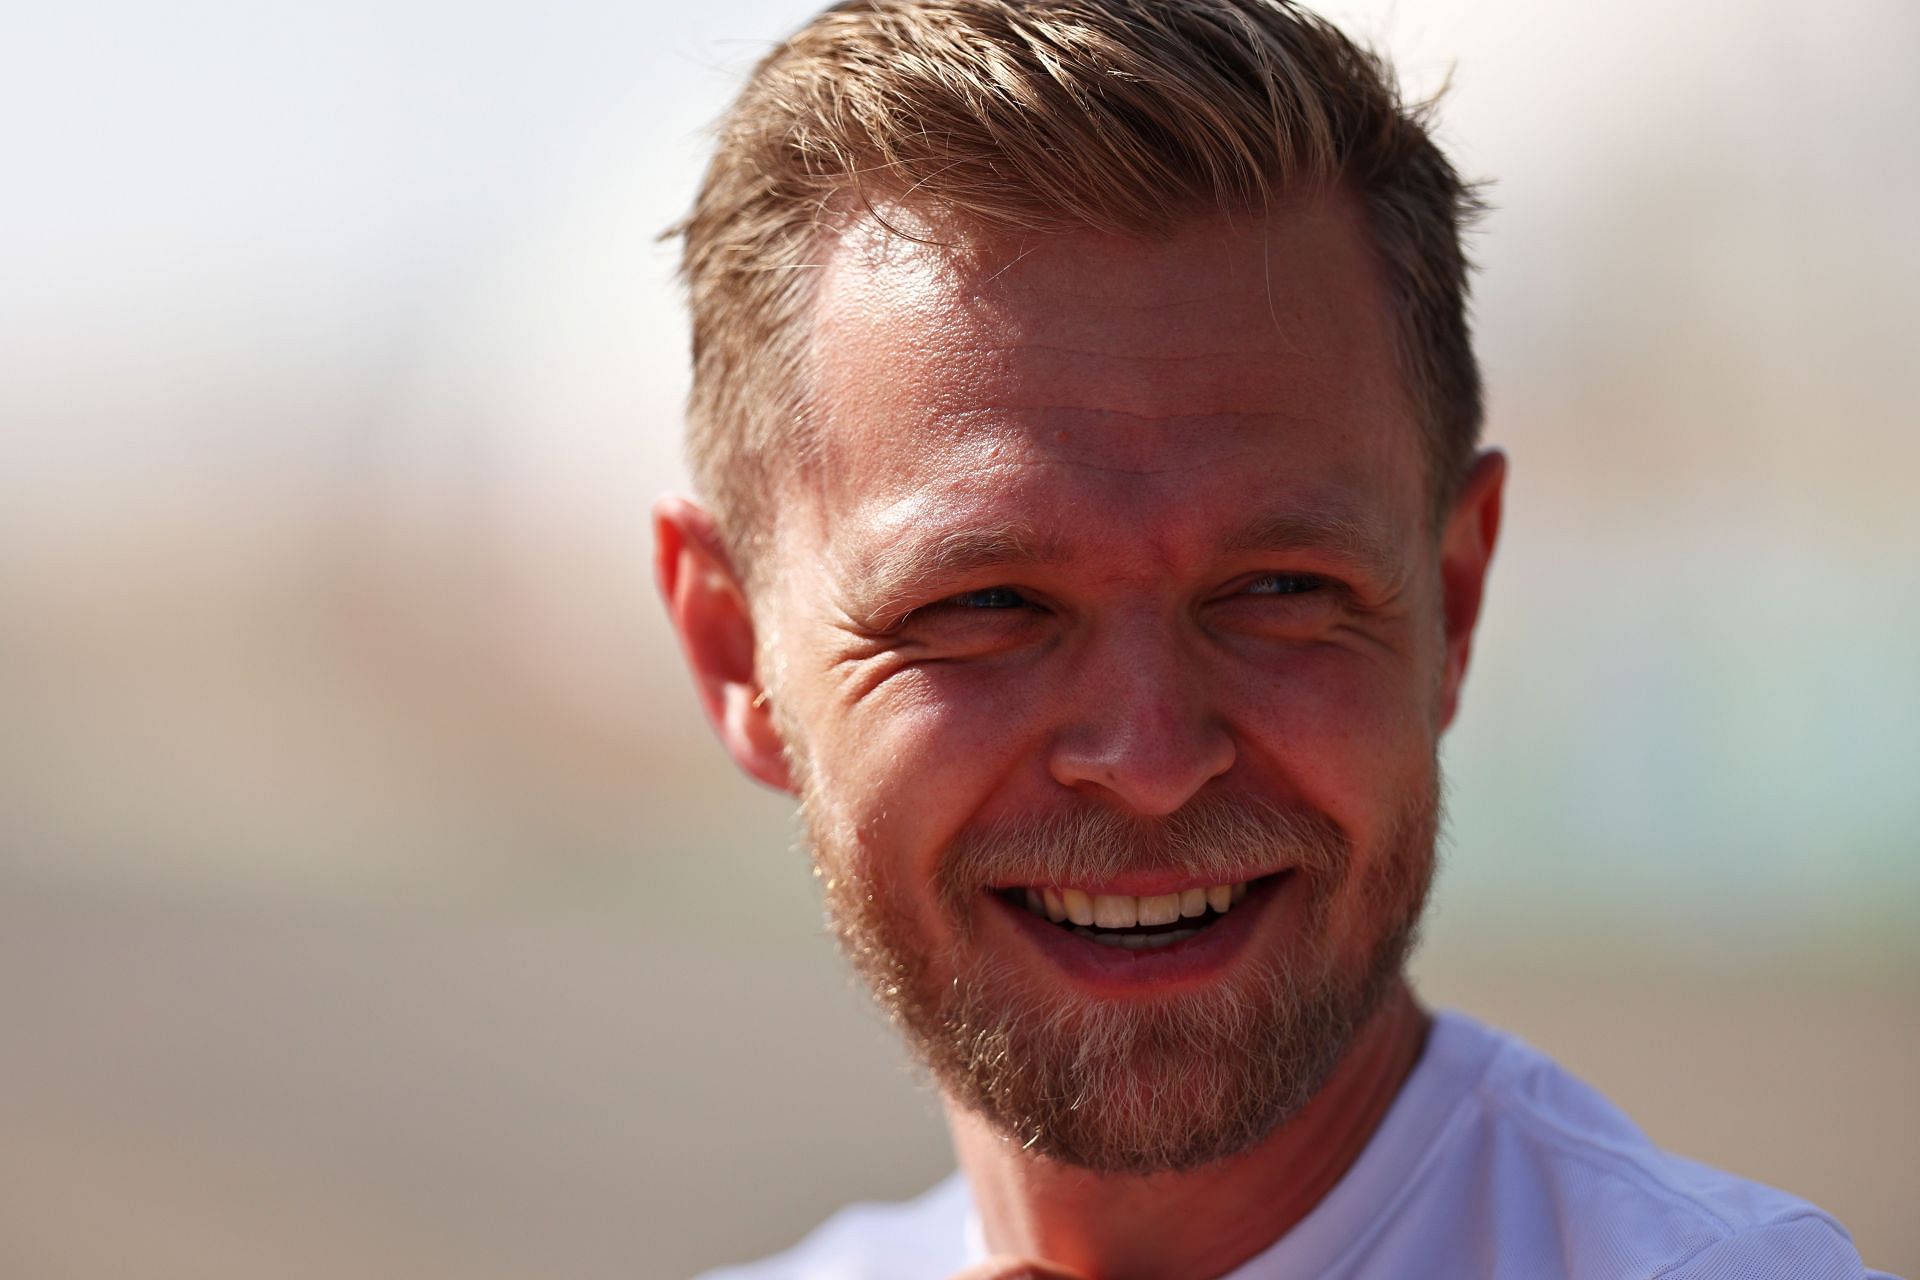 Kevin Magnussen is back on the grid with Haas